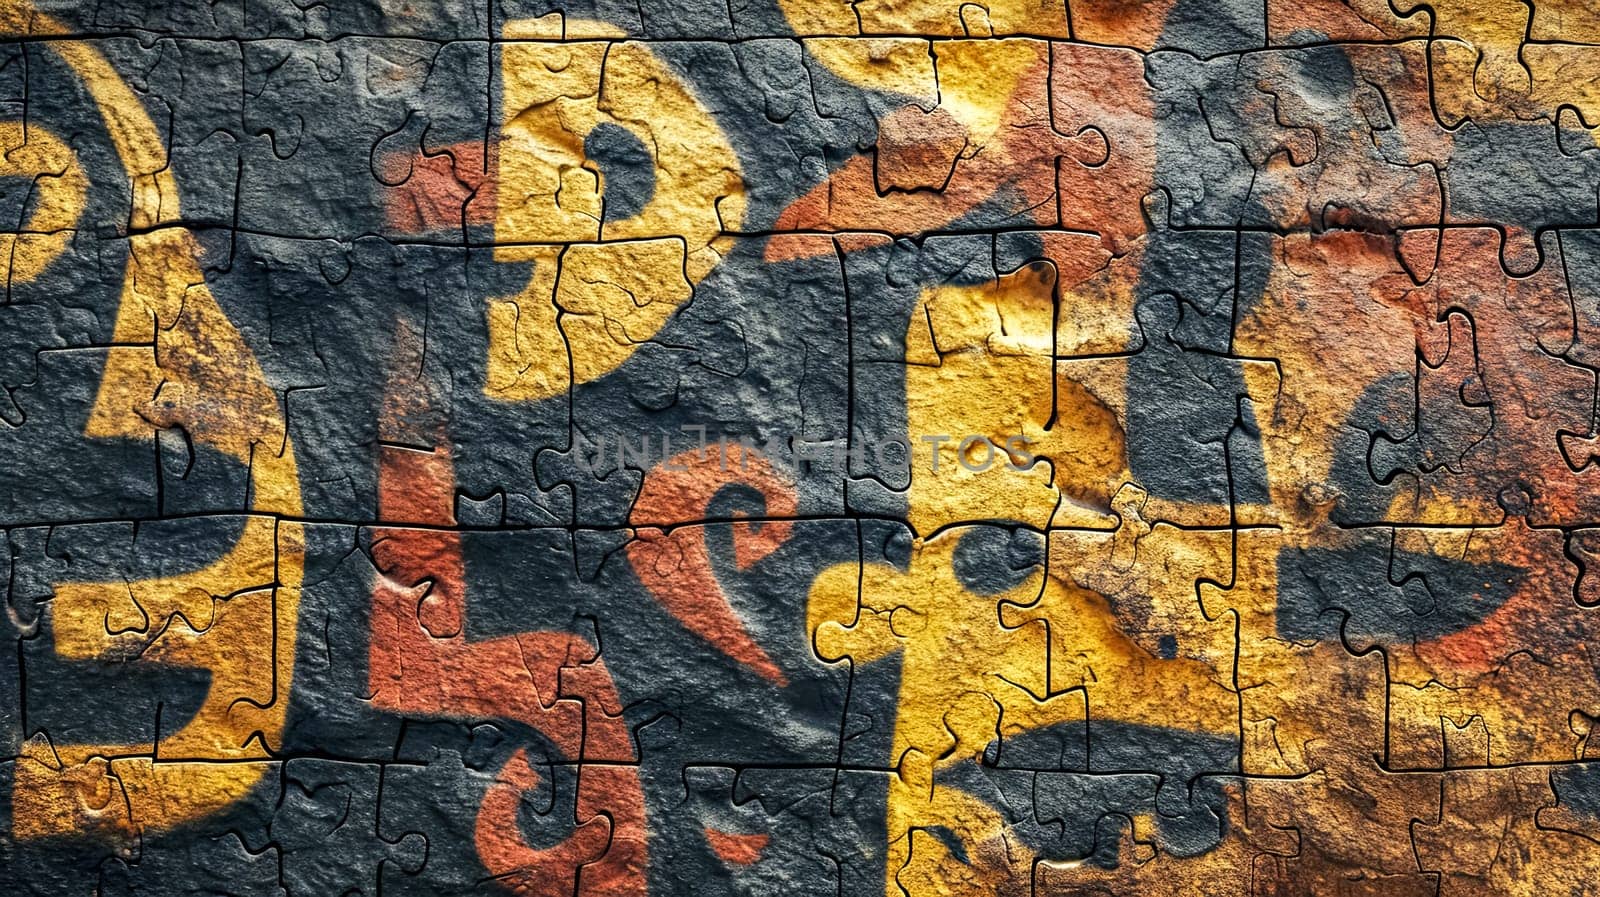 Assembled jigsaw puzzle showcasing a textured tribal cave painting design. by Edophoto